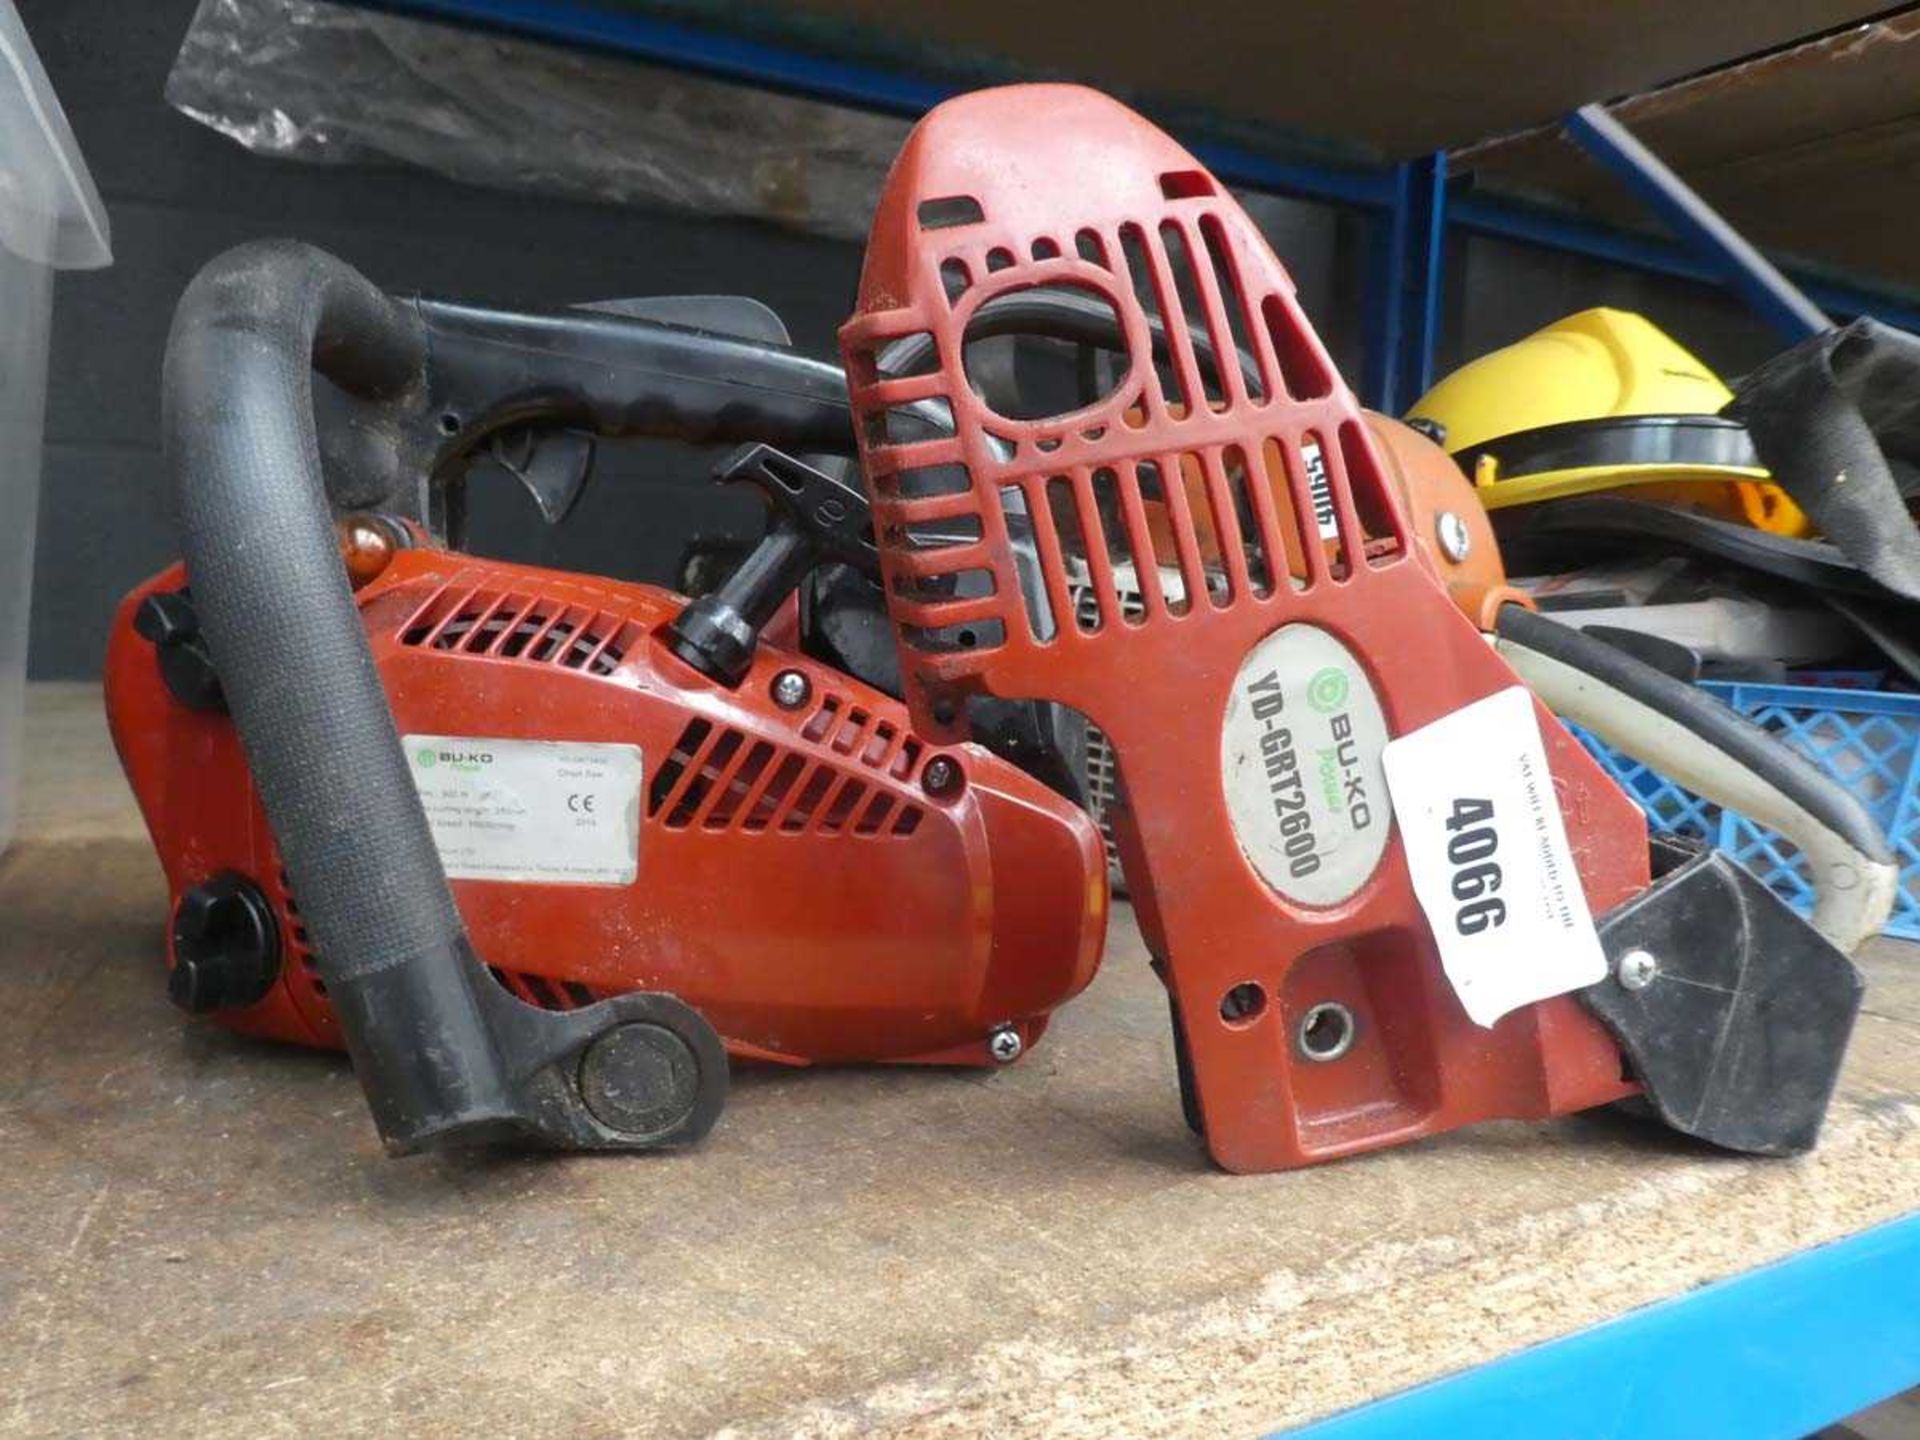 +VAT Small red chainsaw body in parts